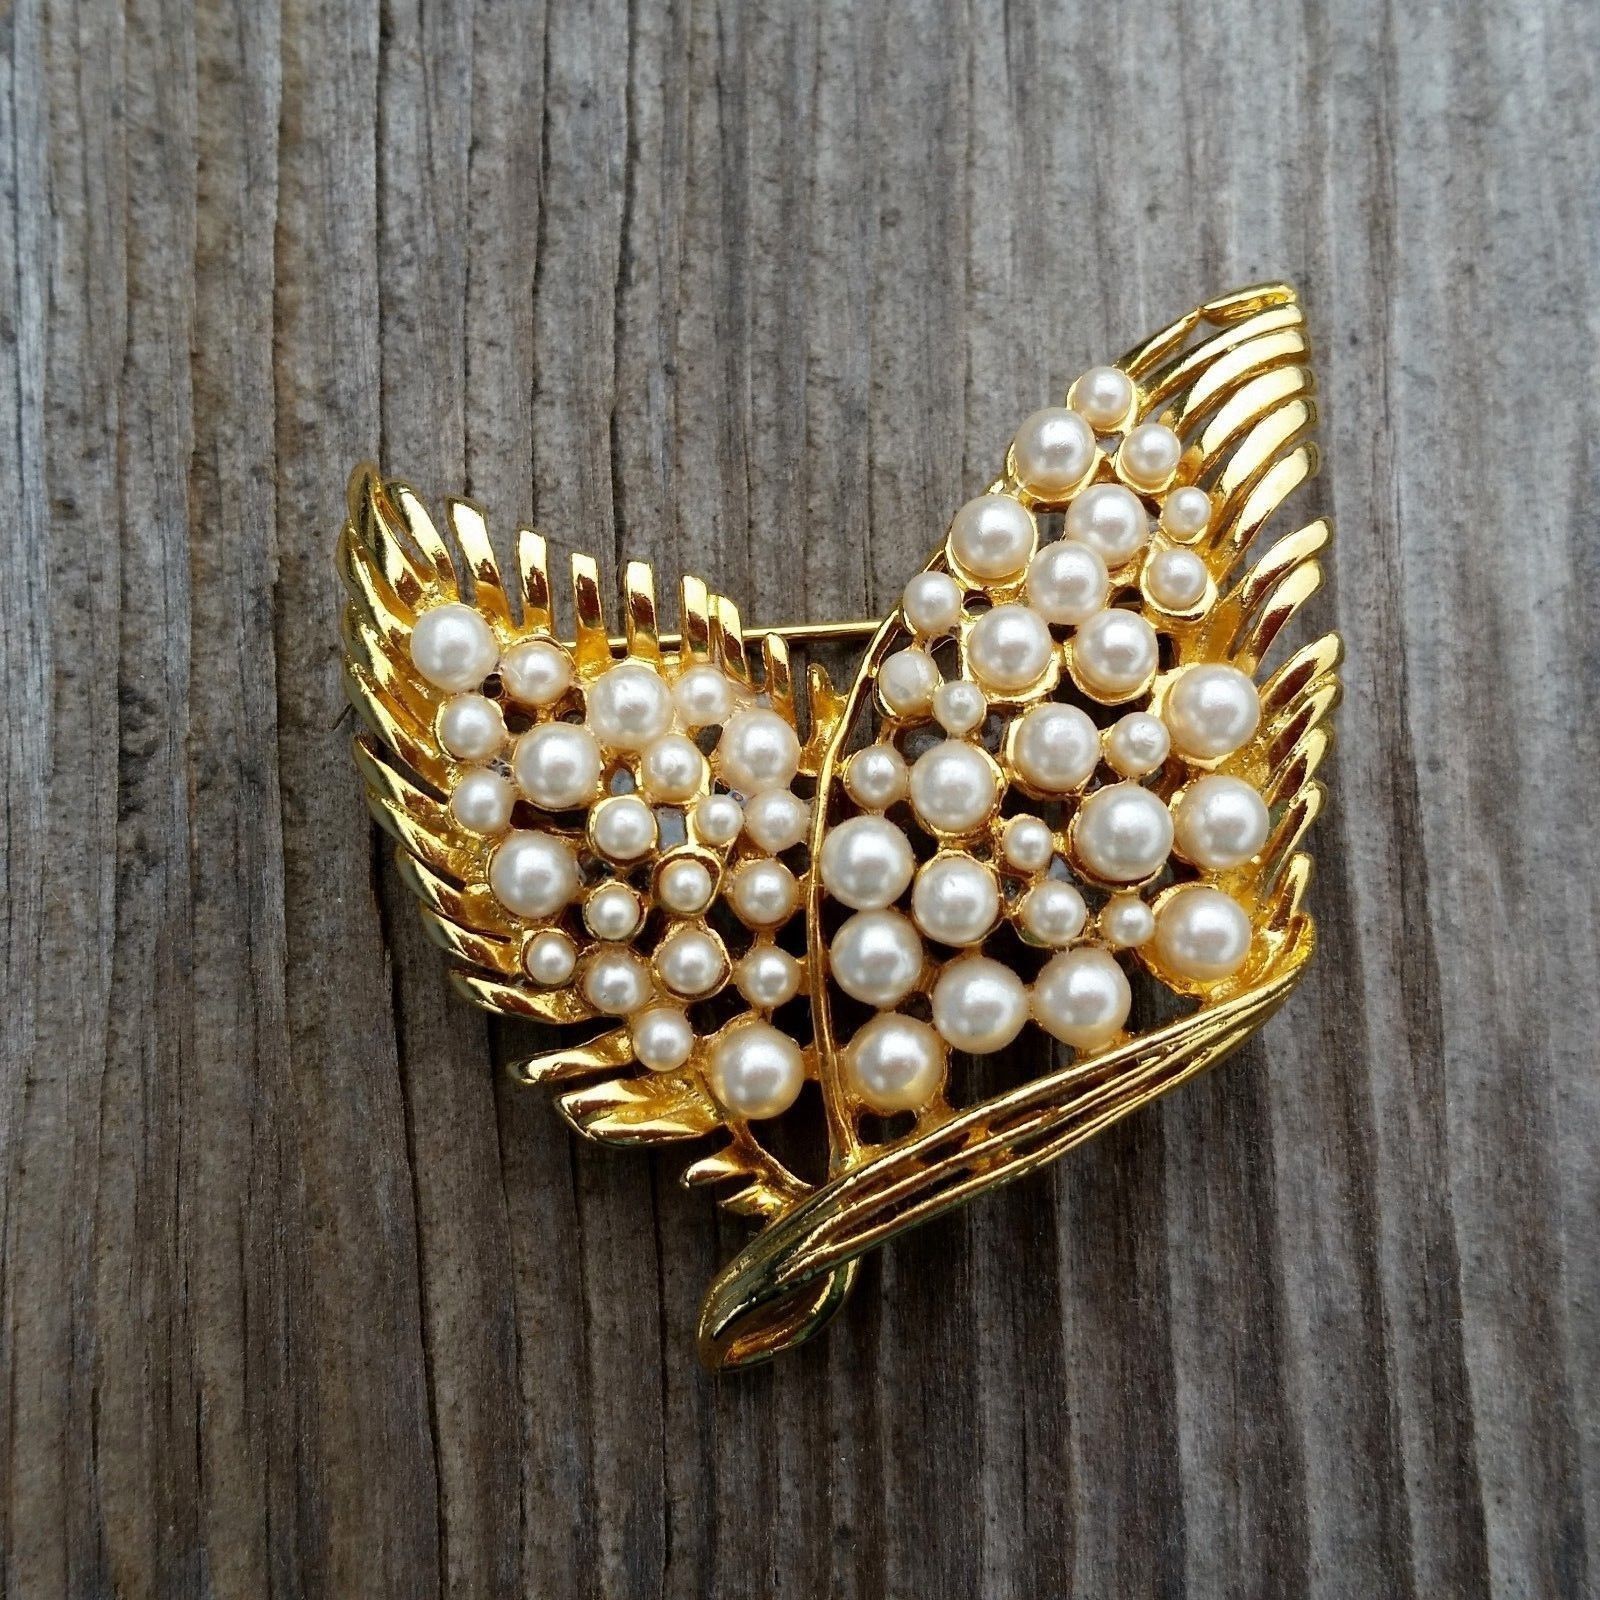 Vintage Leaves Brooch Pin Gold Tone Pearl Beaded Butterfly Wings Thanksgiving Jewelry - At Grandma's Table